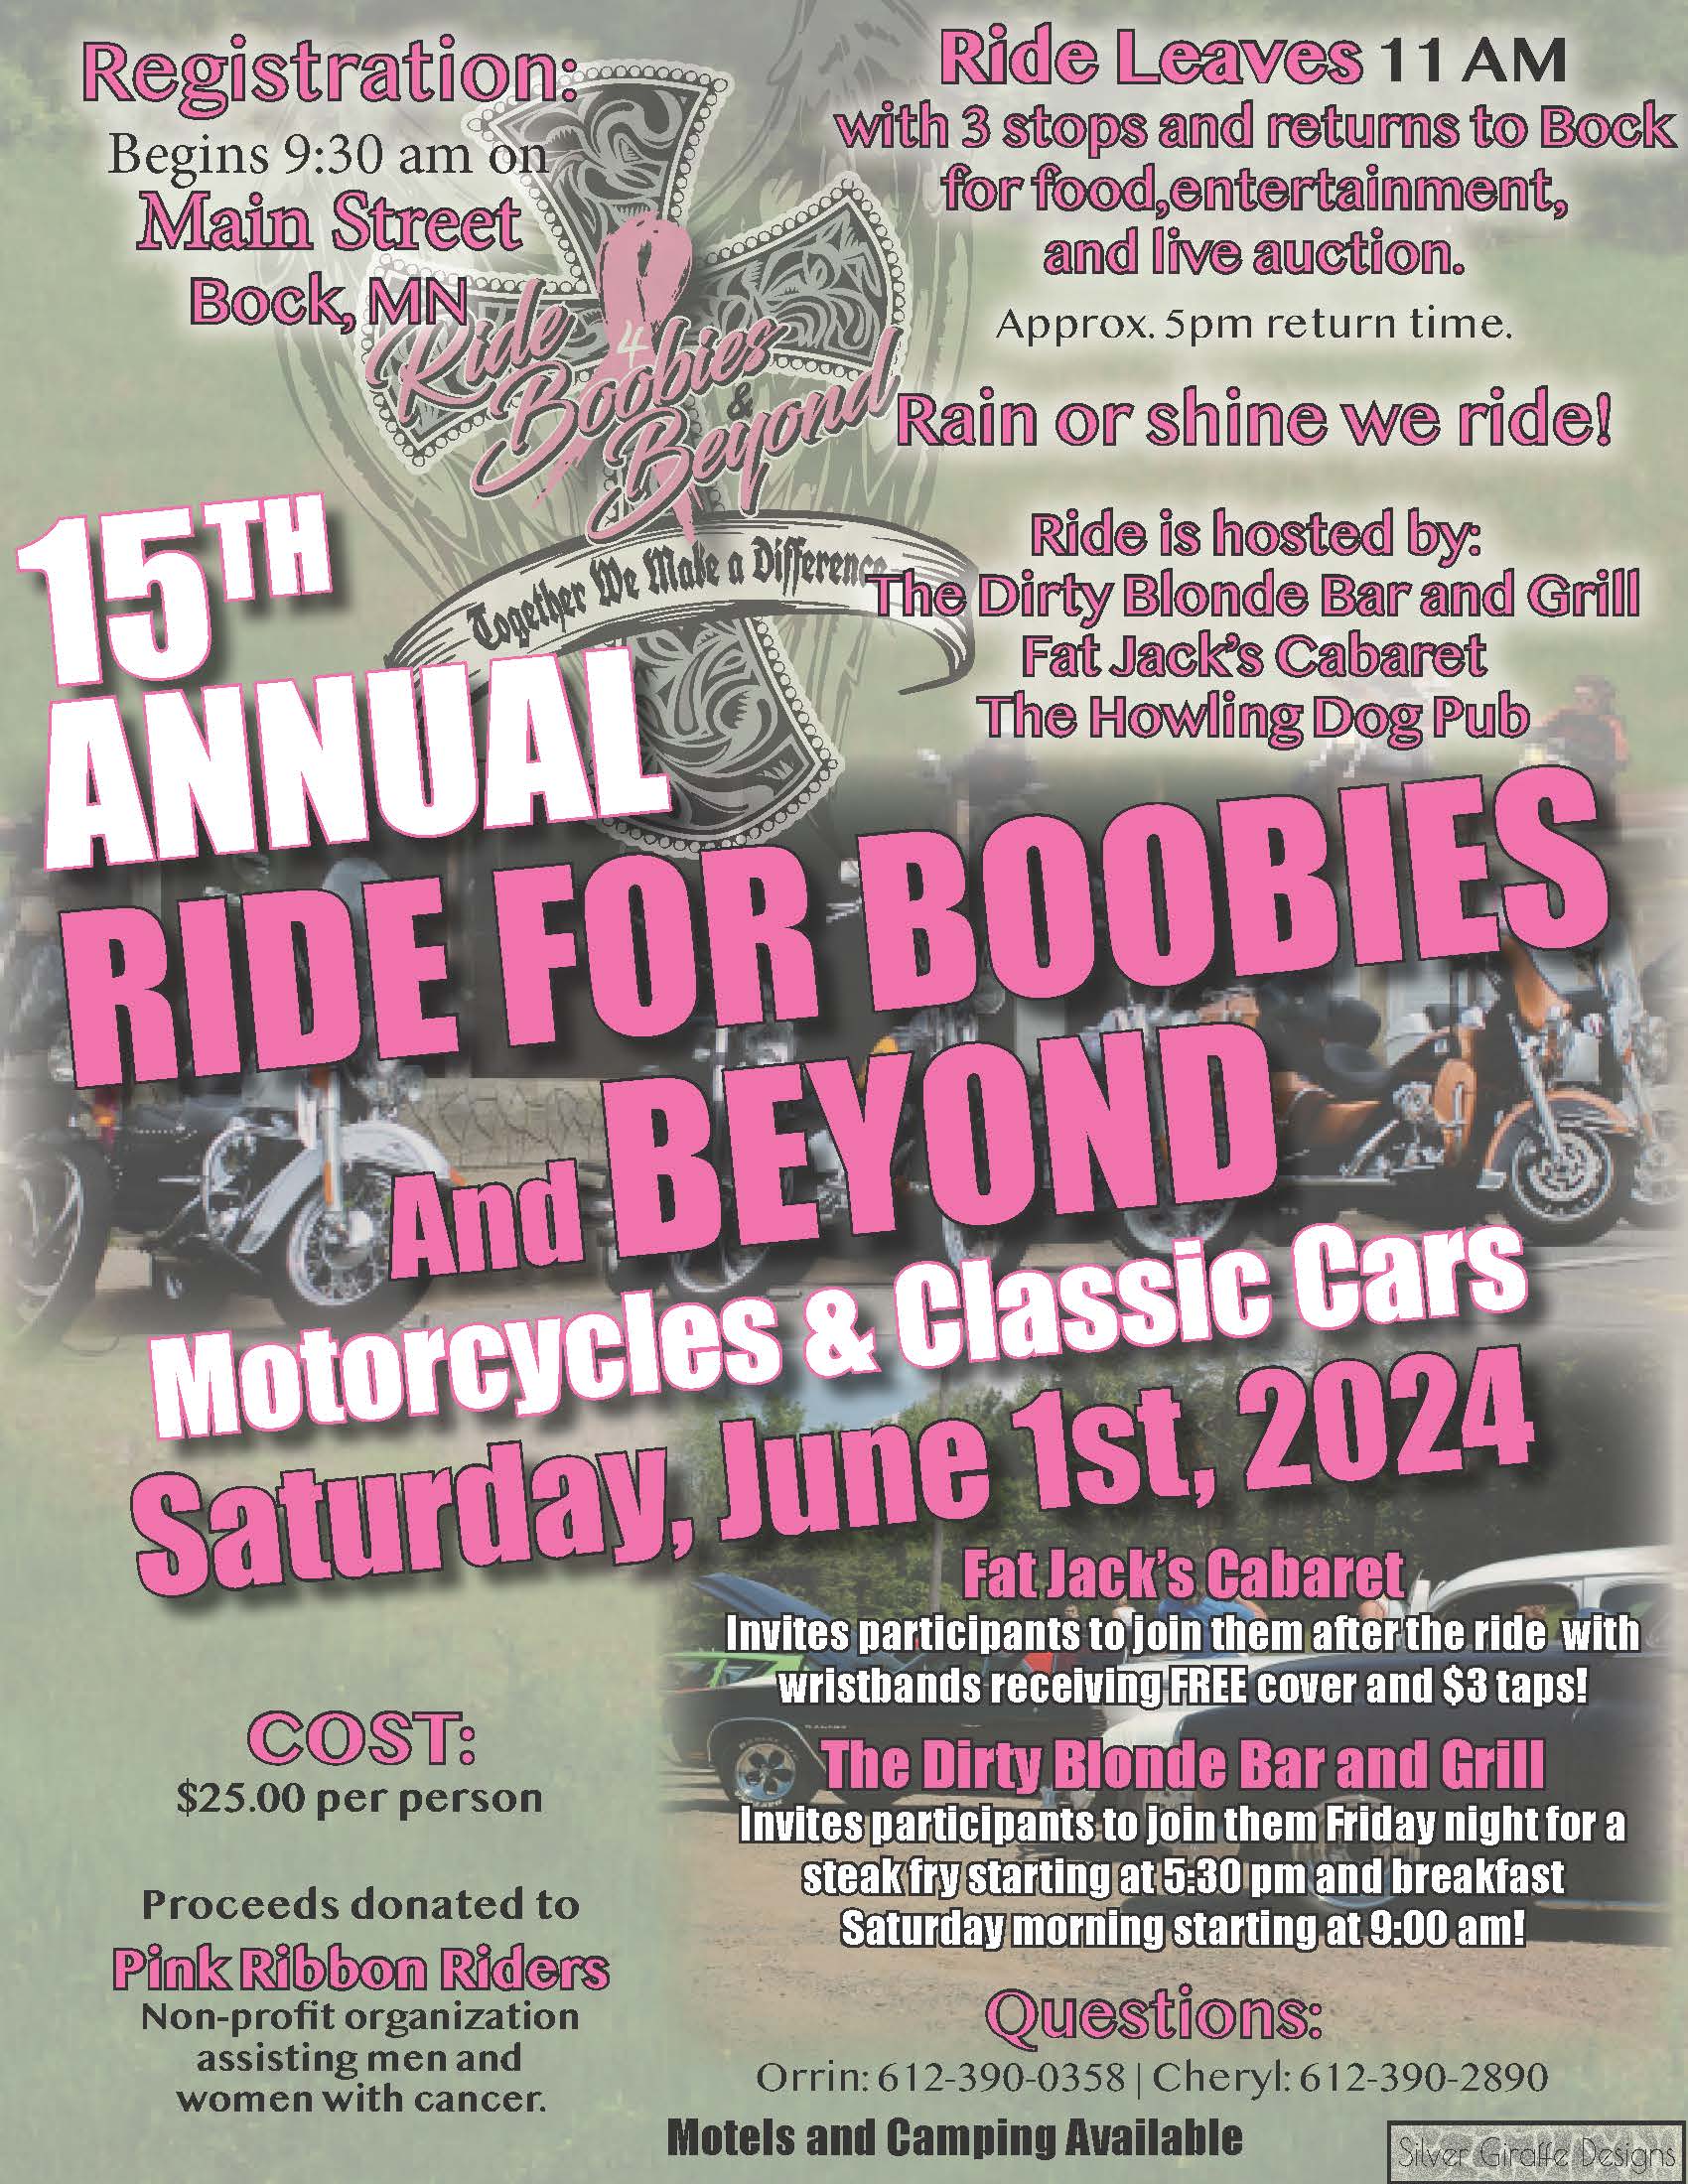 15th Annual Ride for Boobies and Beyond